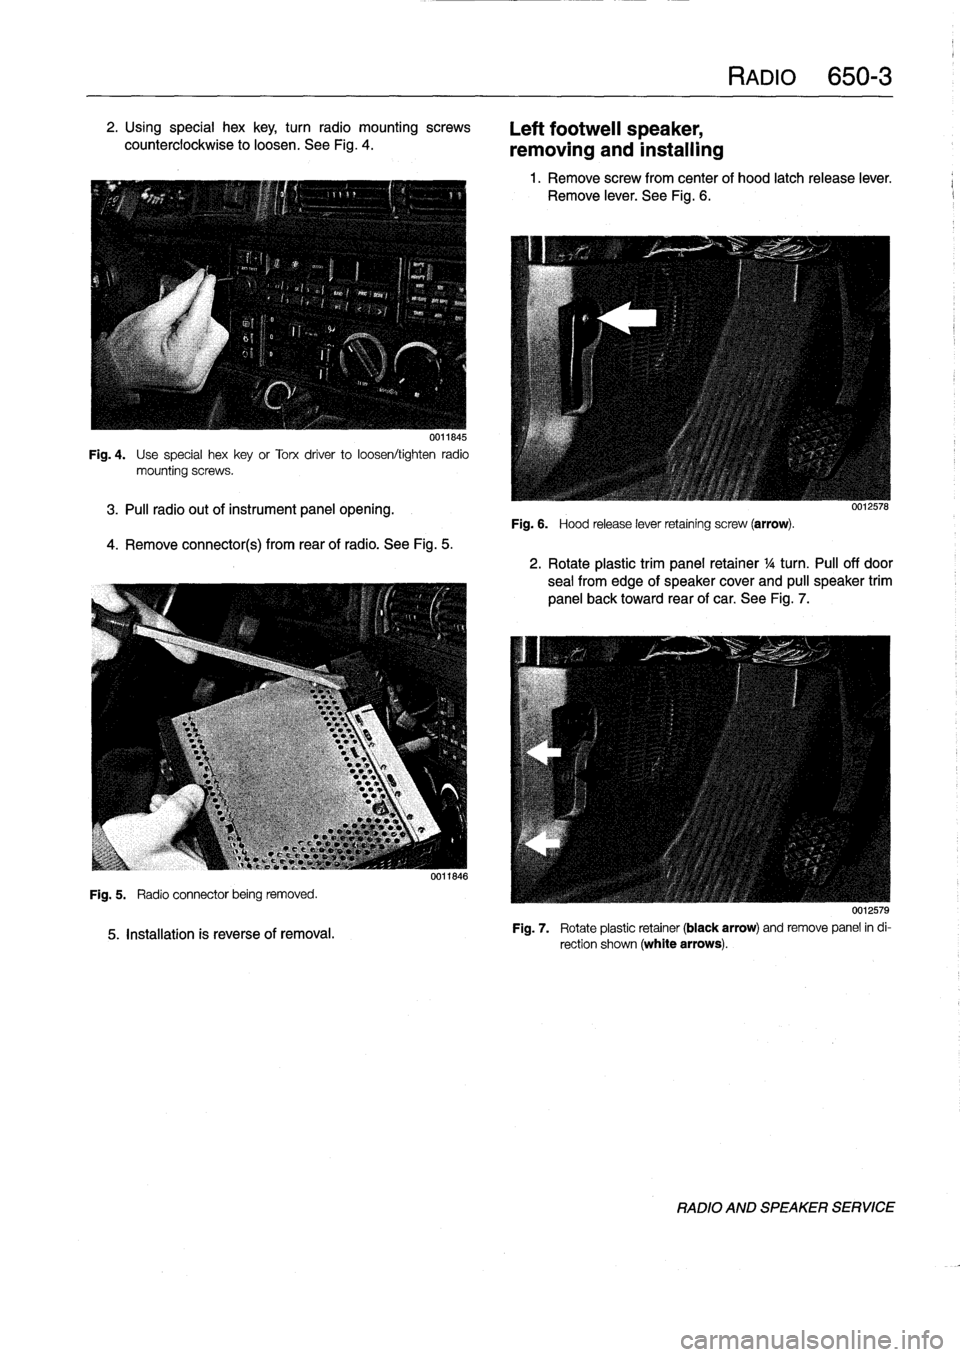 BMW 323i 1993 E36 Workshop Manual 2
.
Using
special
hex
key,
turn
radio
mountingscrews

counterclockwise
to
loosen
.
See
Fig
.
4
.

0011845

Fig
.
4
.

	

Use
special
hexkey
or
Torx
driver
to
loosen/tighten
radio
mountingscrews
.

3
.